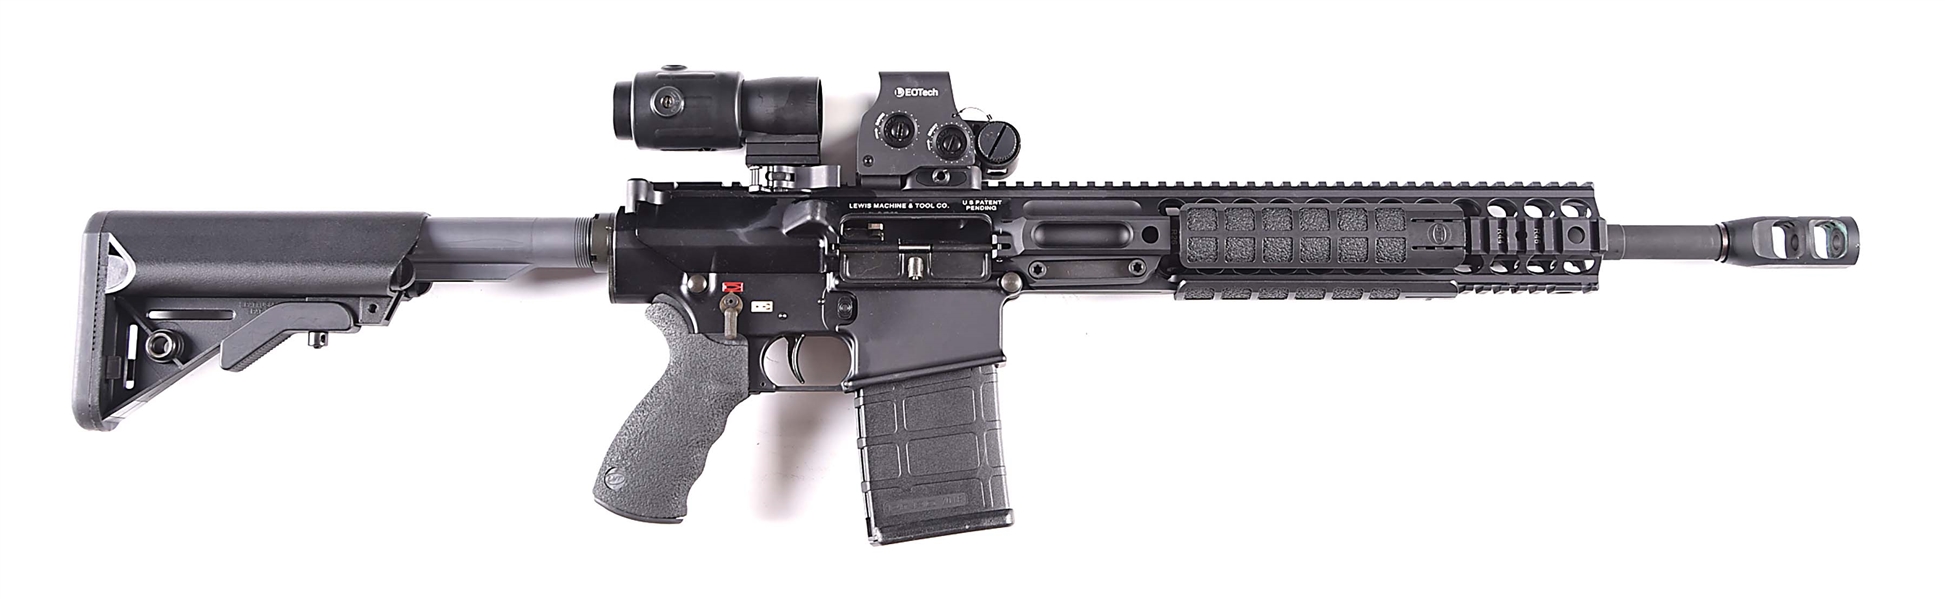 (M) LEWIS MACHINE AND TOOL LM308MWS SEMI-AUTOMATIC RIFLE WITH EOTECH OPTICS.